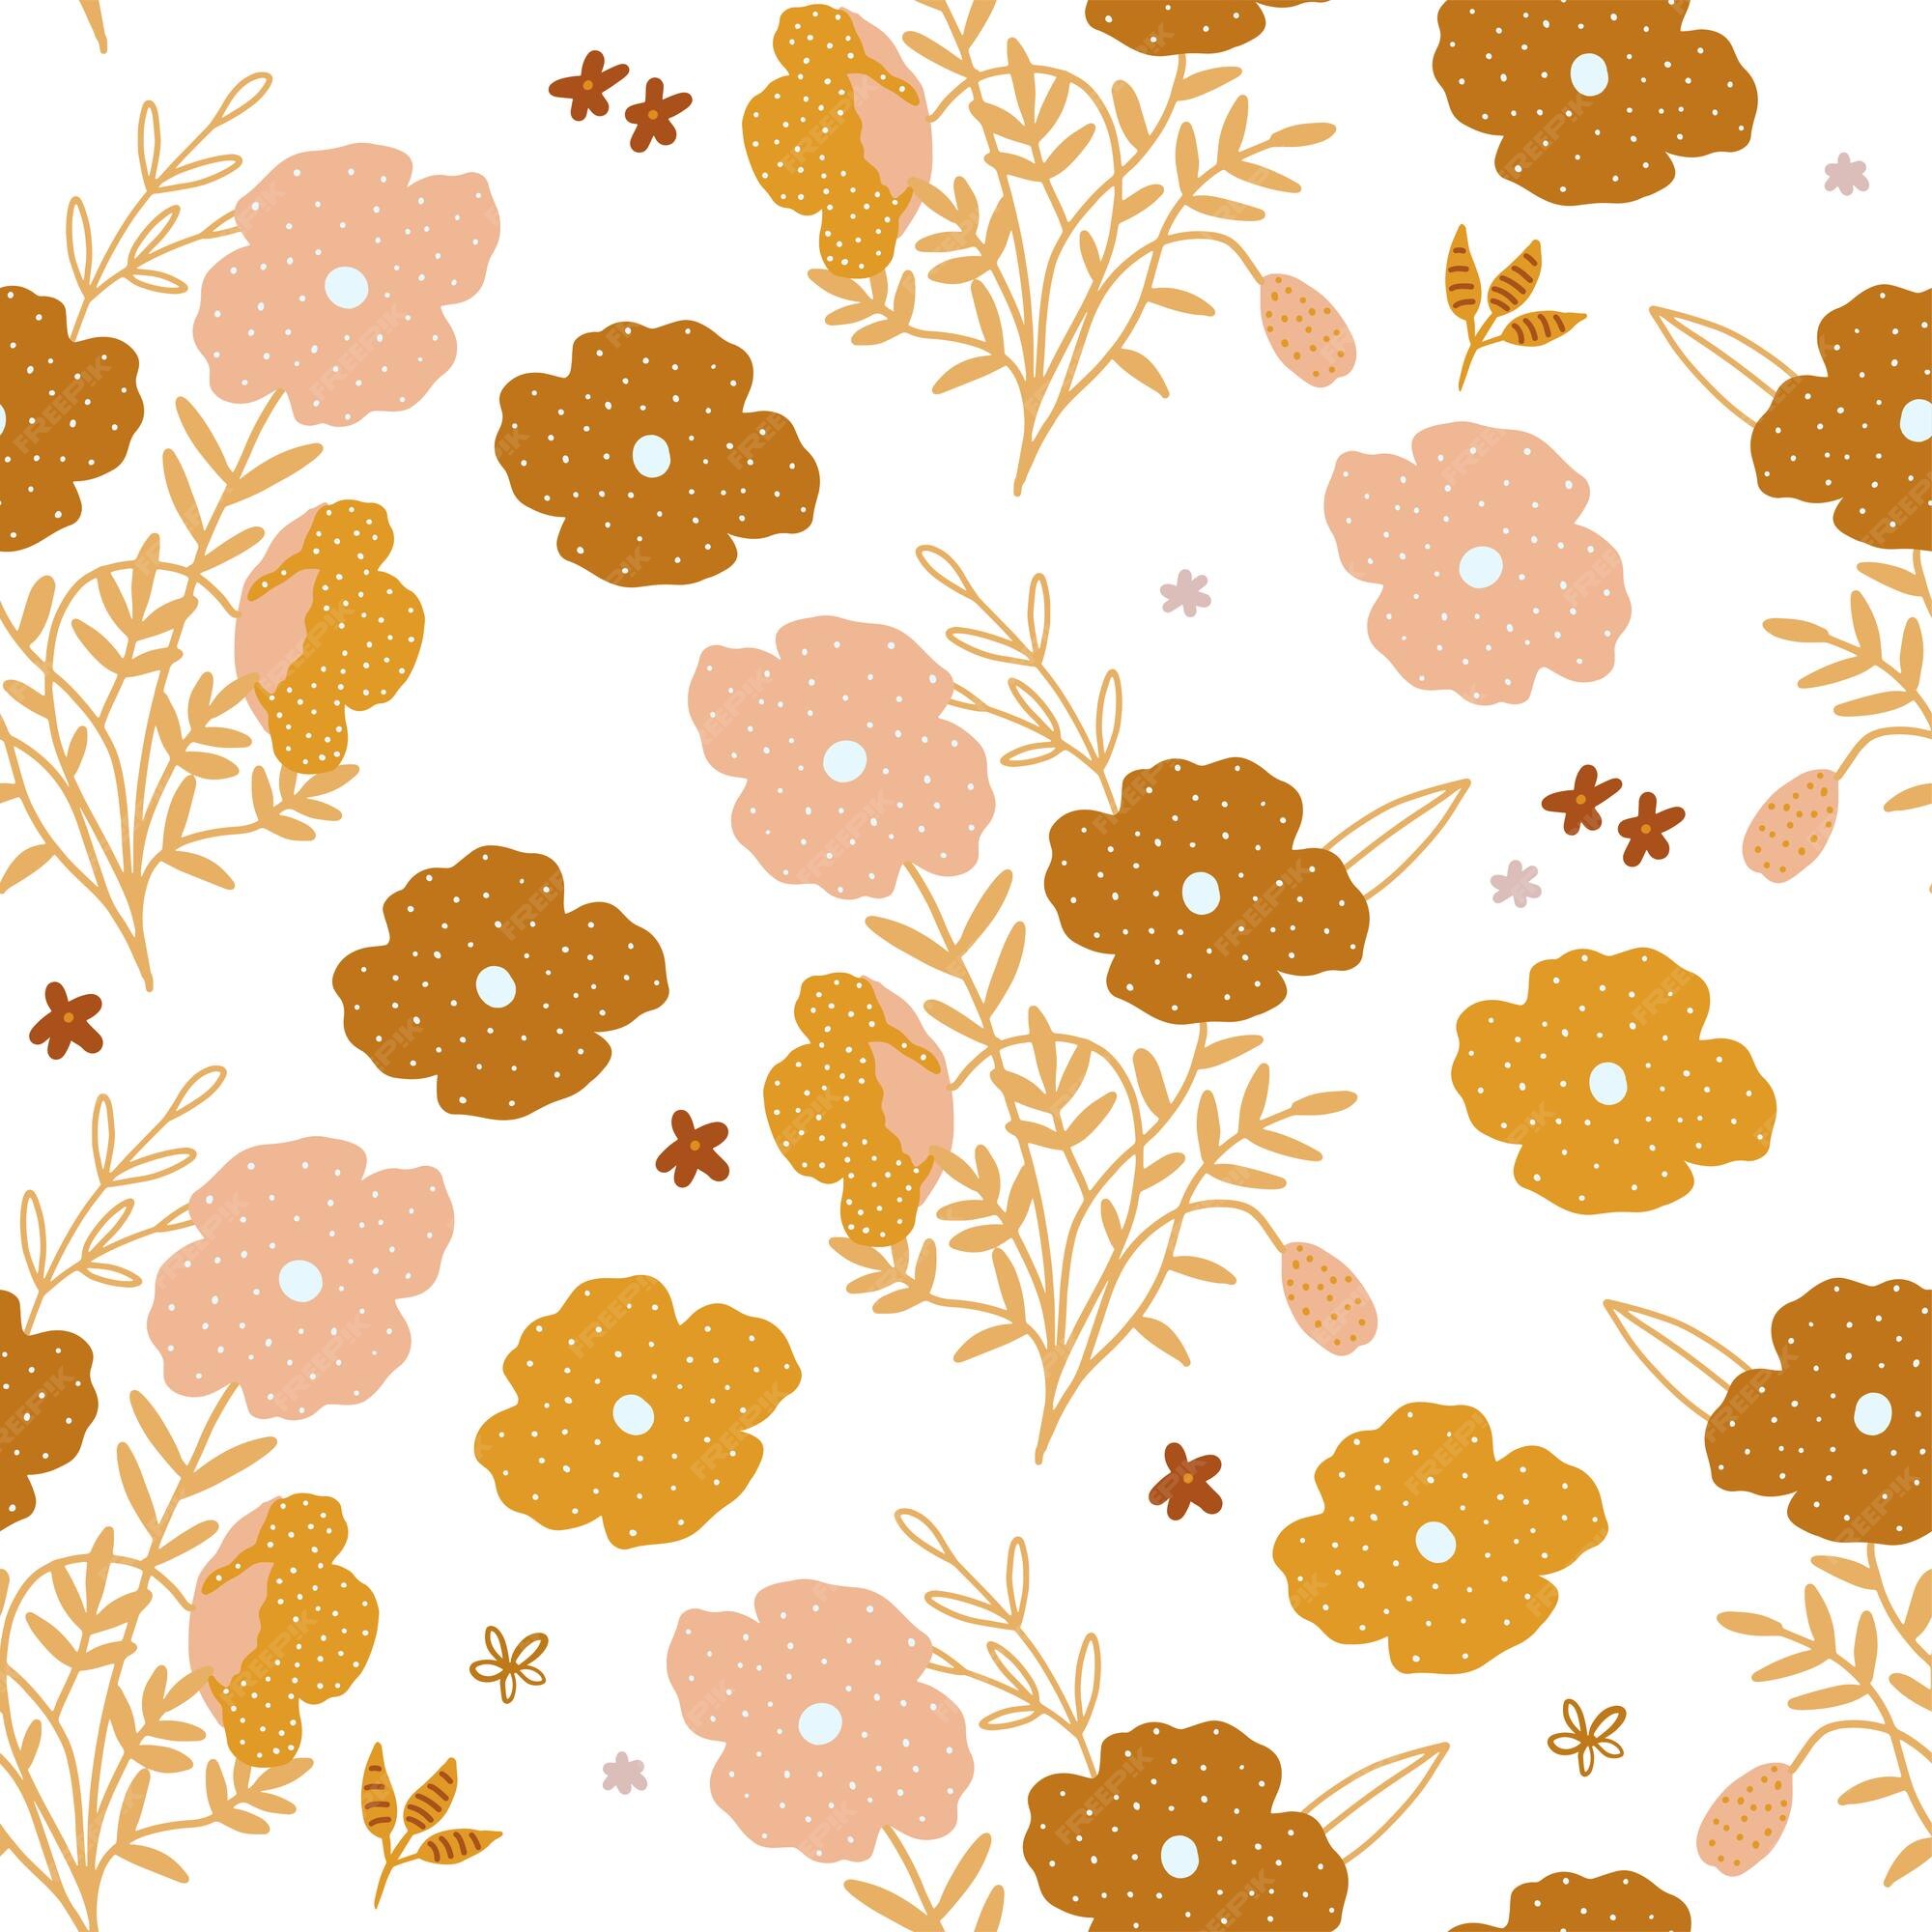 Premium Vector | Cute groovy flowers seamless pattern vector aesthetic  simple floral background